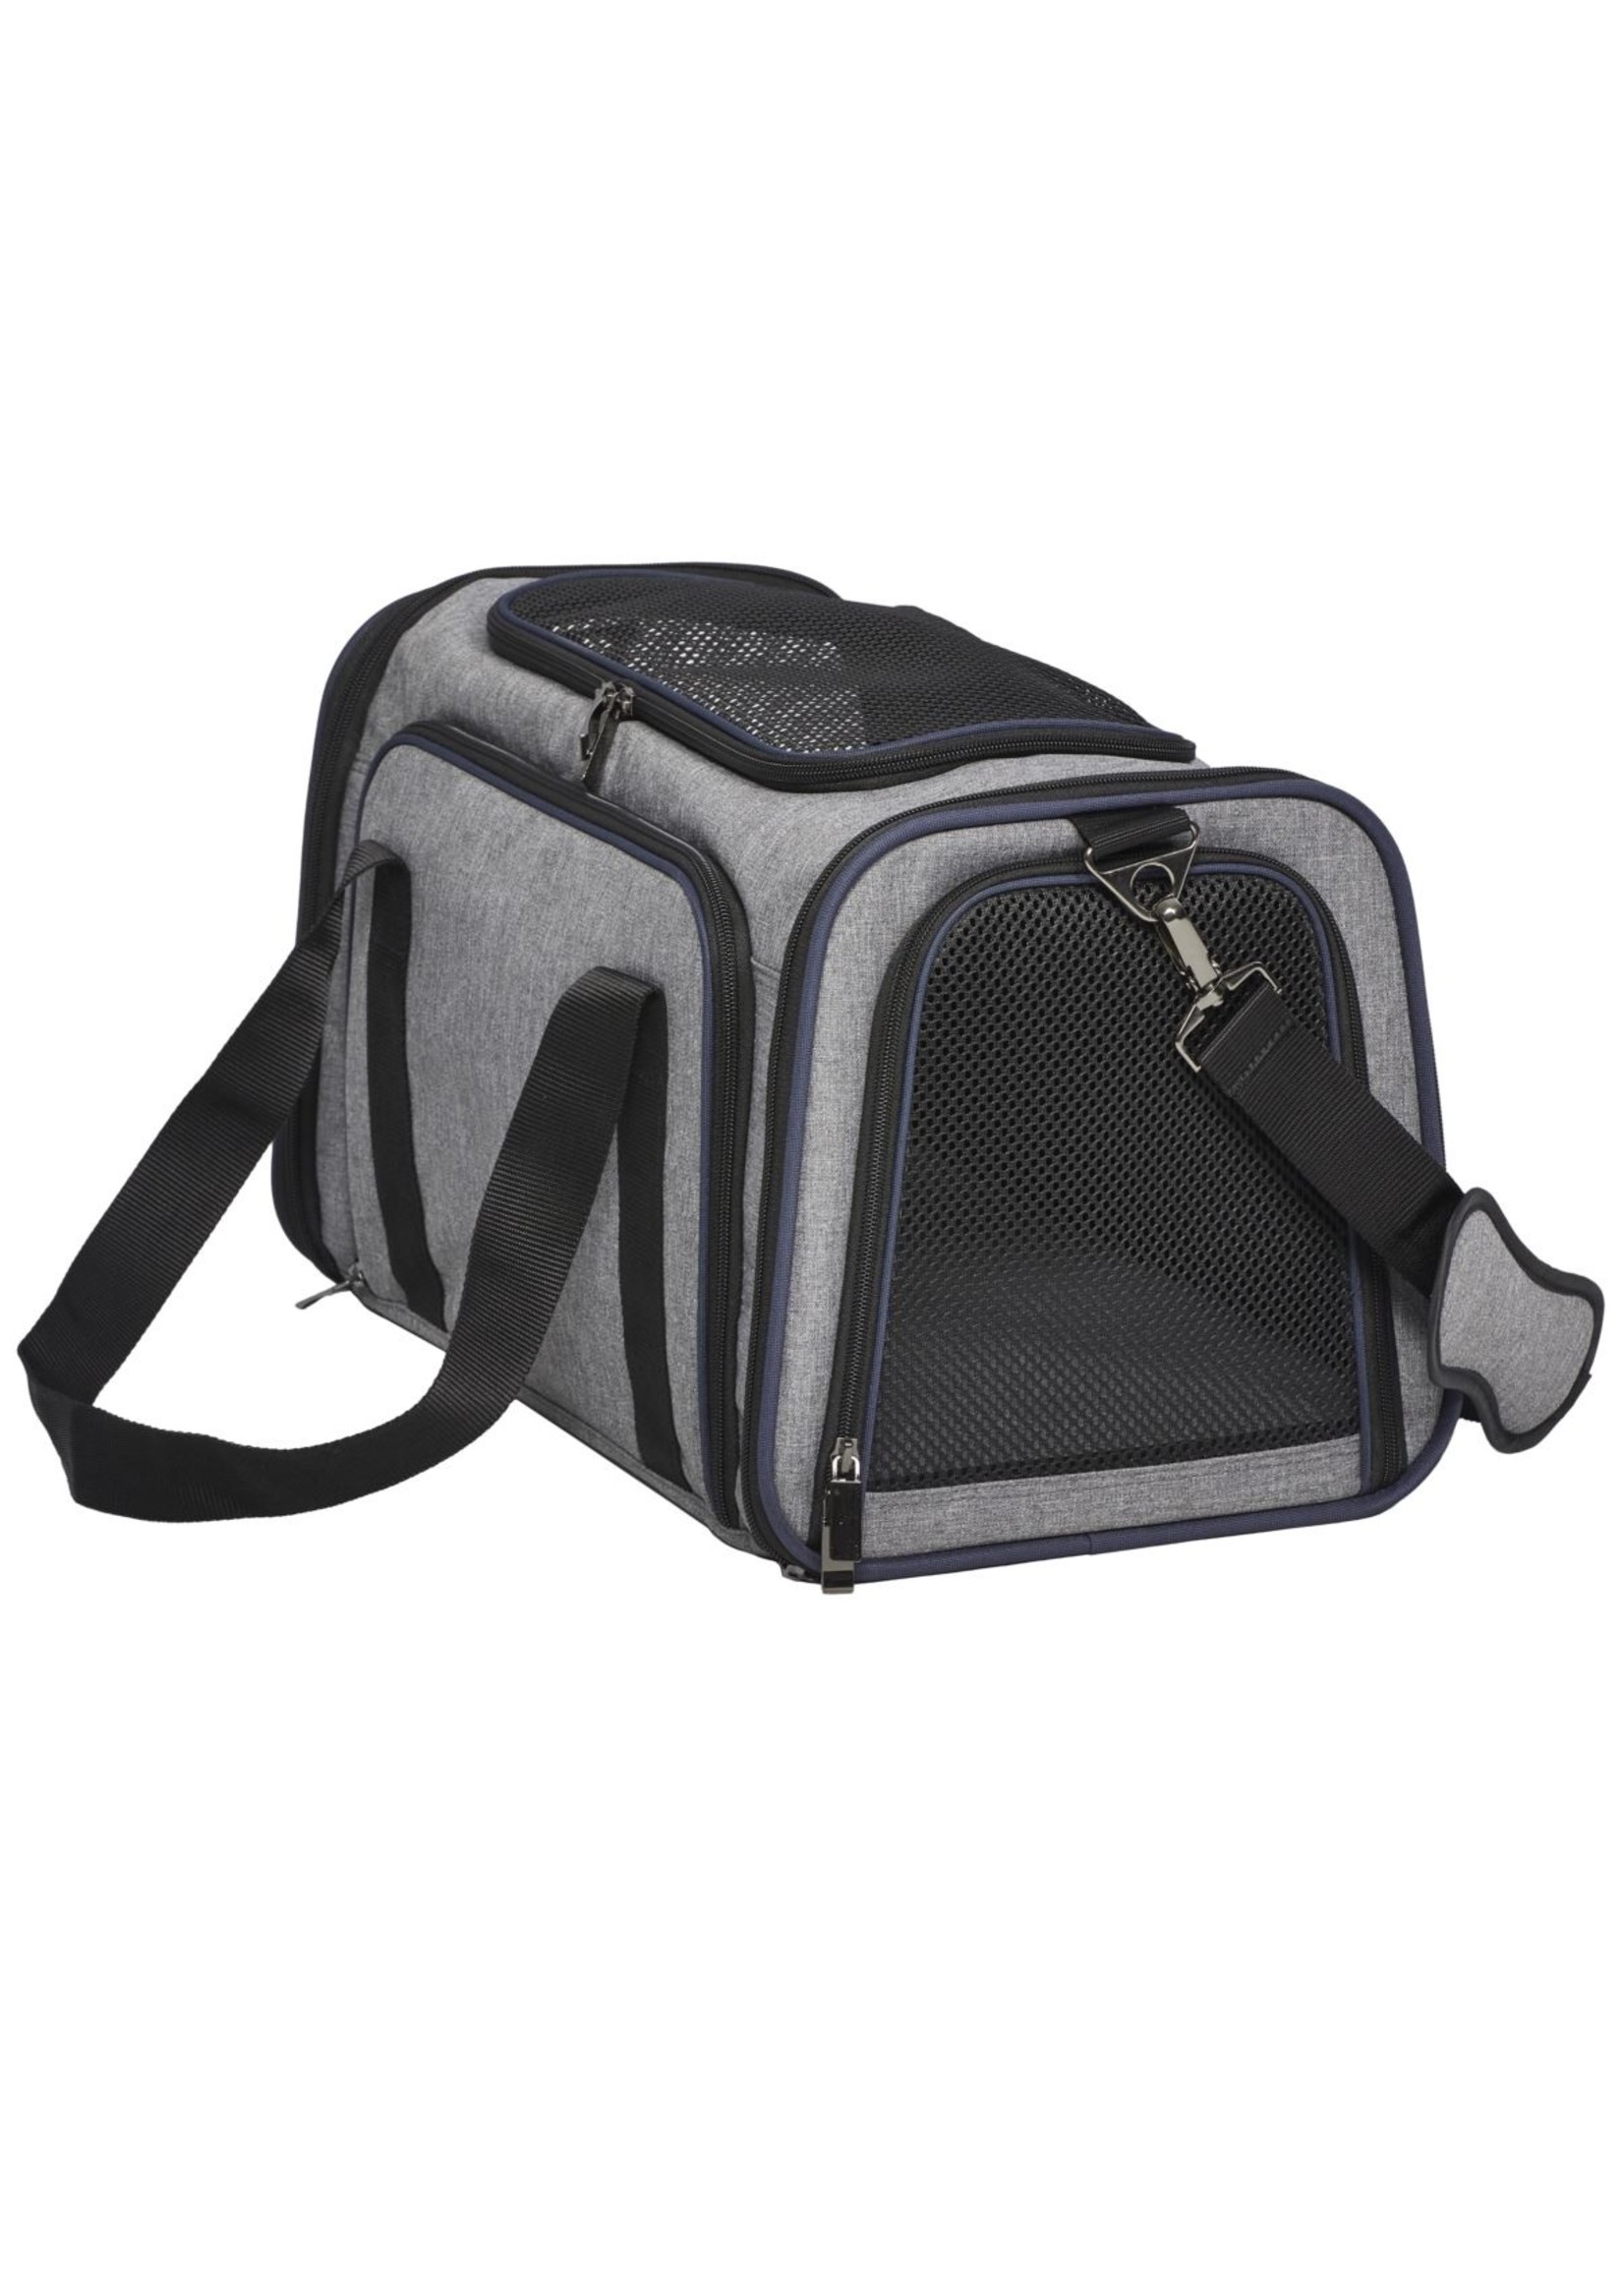 Midwest Duffy Pet Carrier